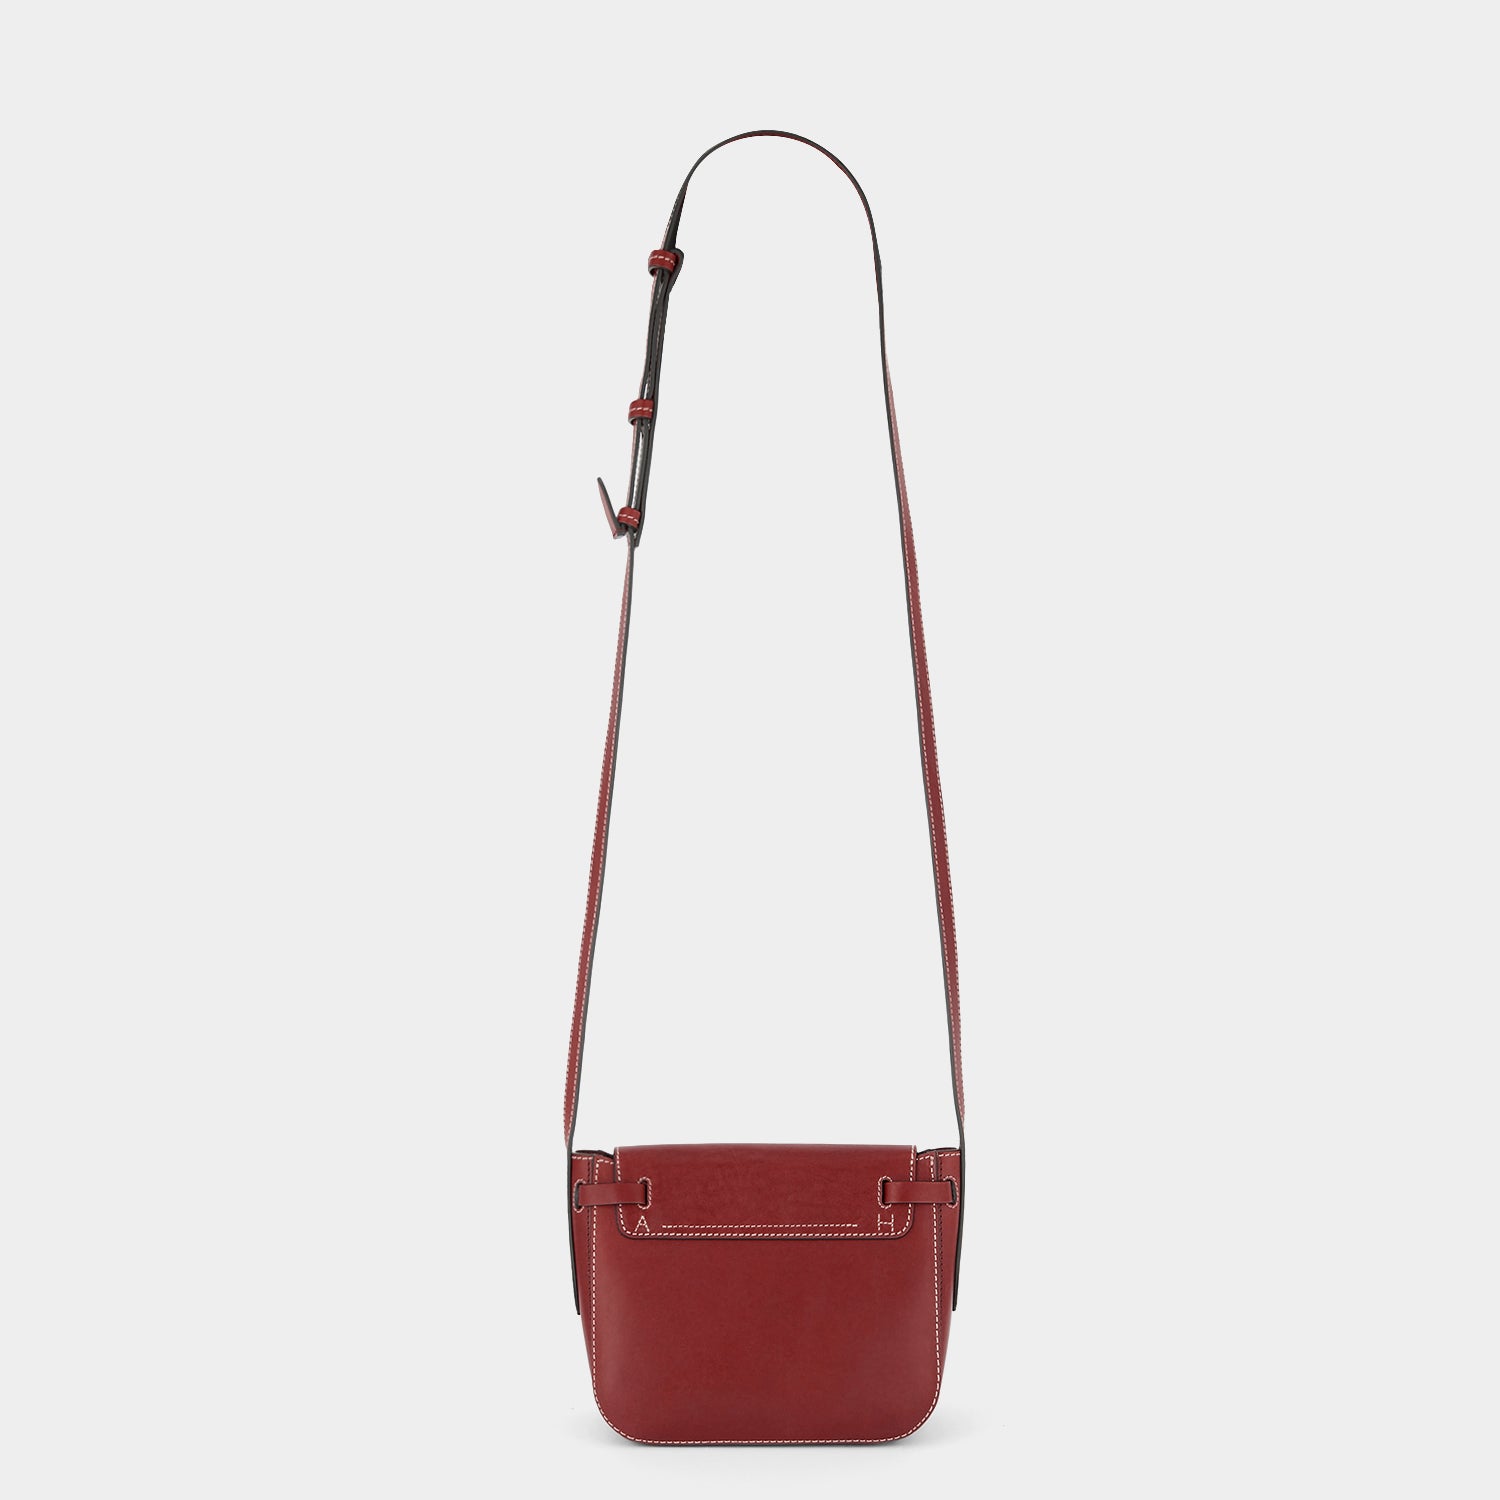 Return to Nature Cross-body -

                  
                    Compostable Leather in Rosewood -
                  

                  Anya Hindmarch UK
